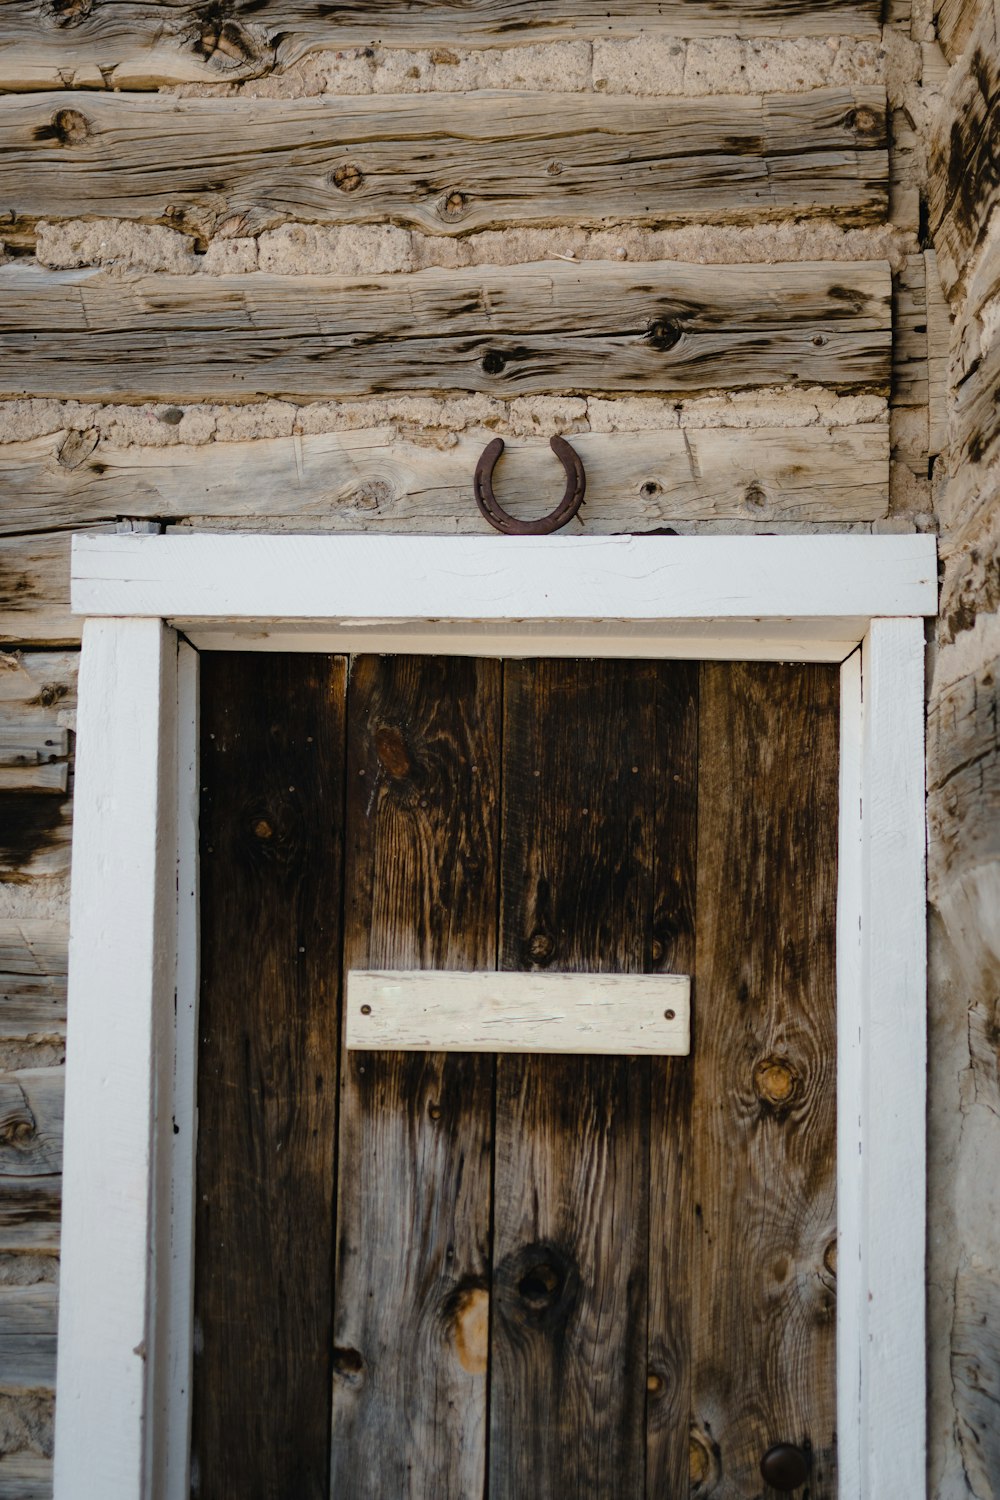 a wooden door with a sign on it